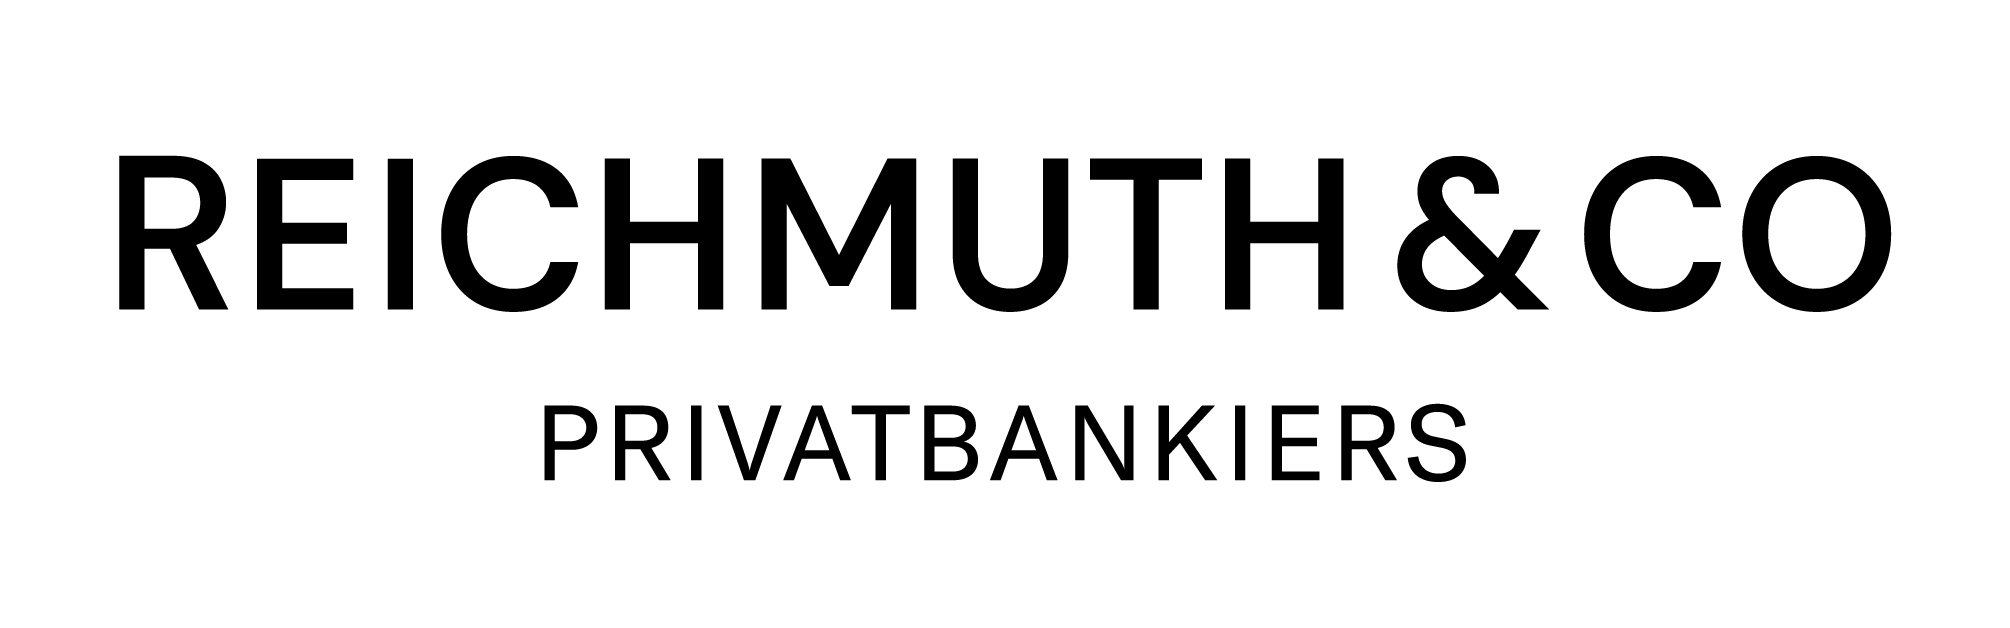 SAMBA Investment Club with the Partner with Unlimited Liability, Reichmuth & Co Privatbankiers